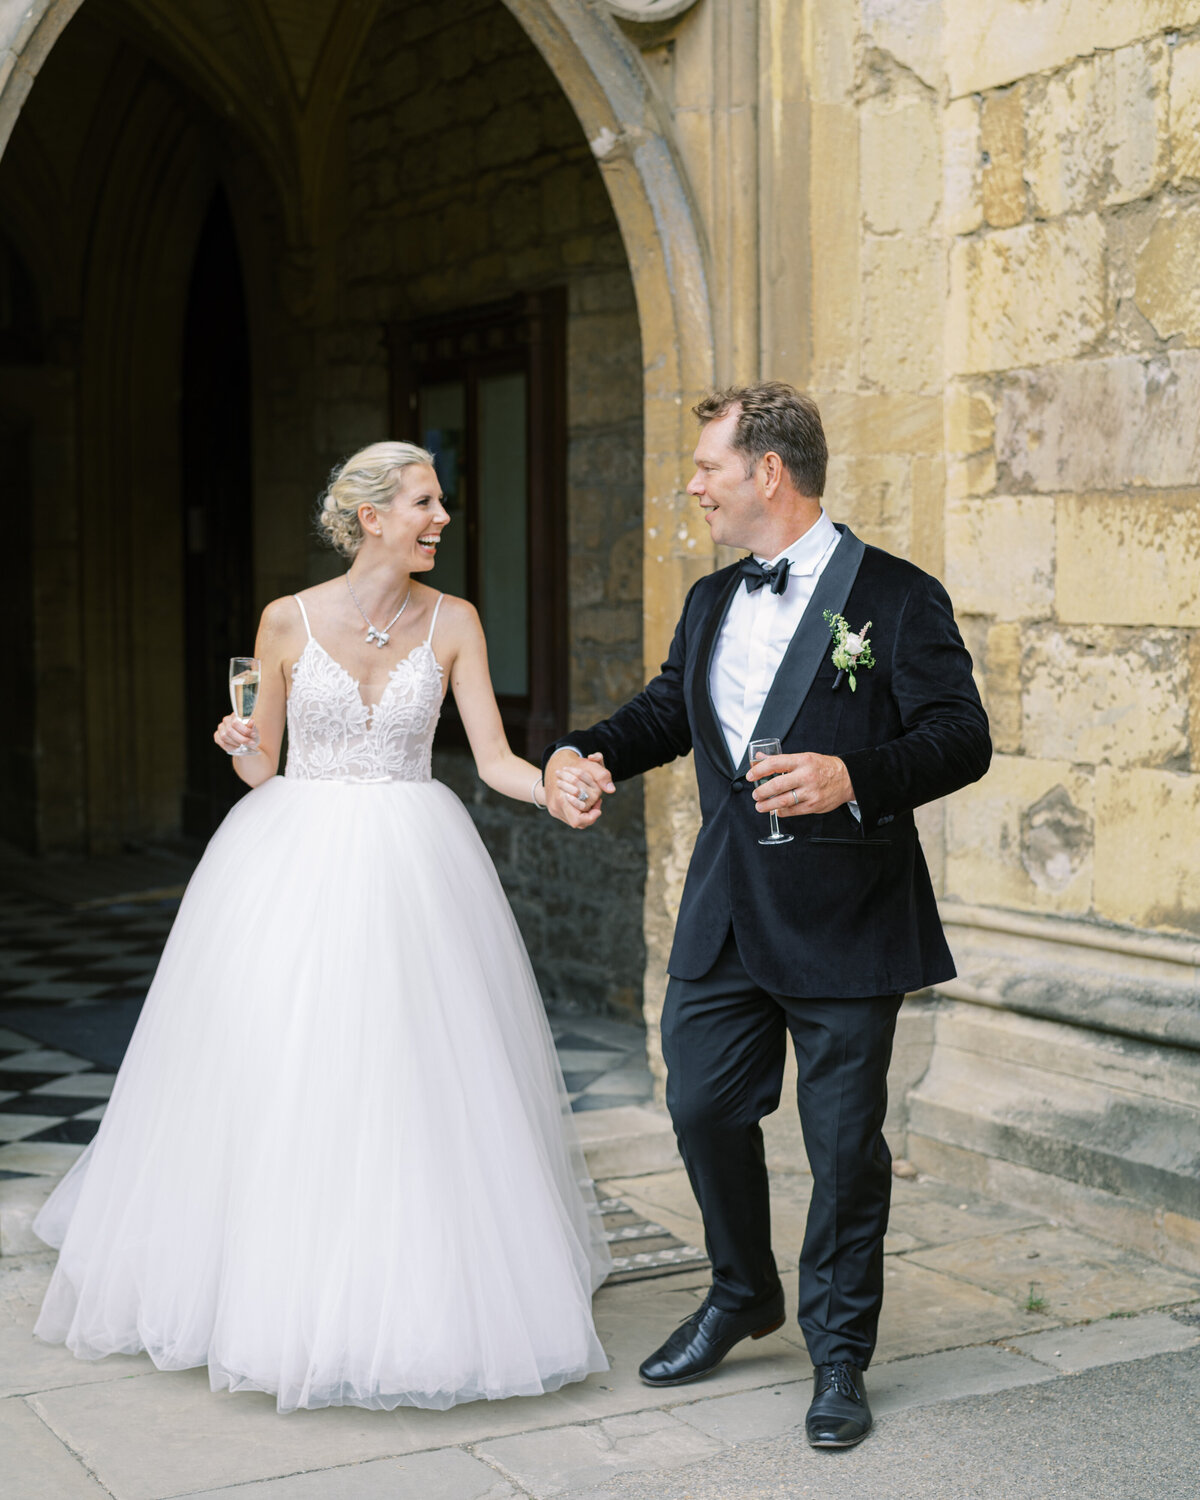 Bride and groom at Oxford wedding